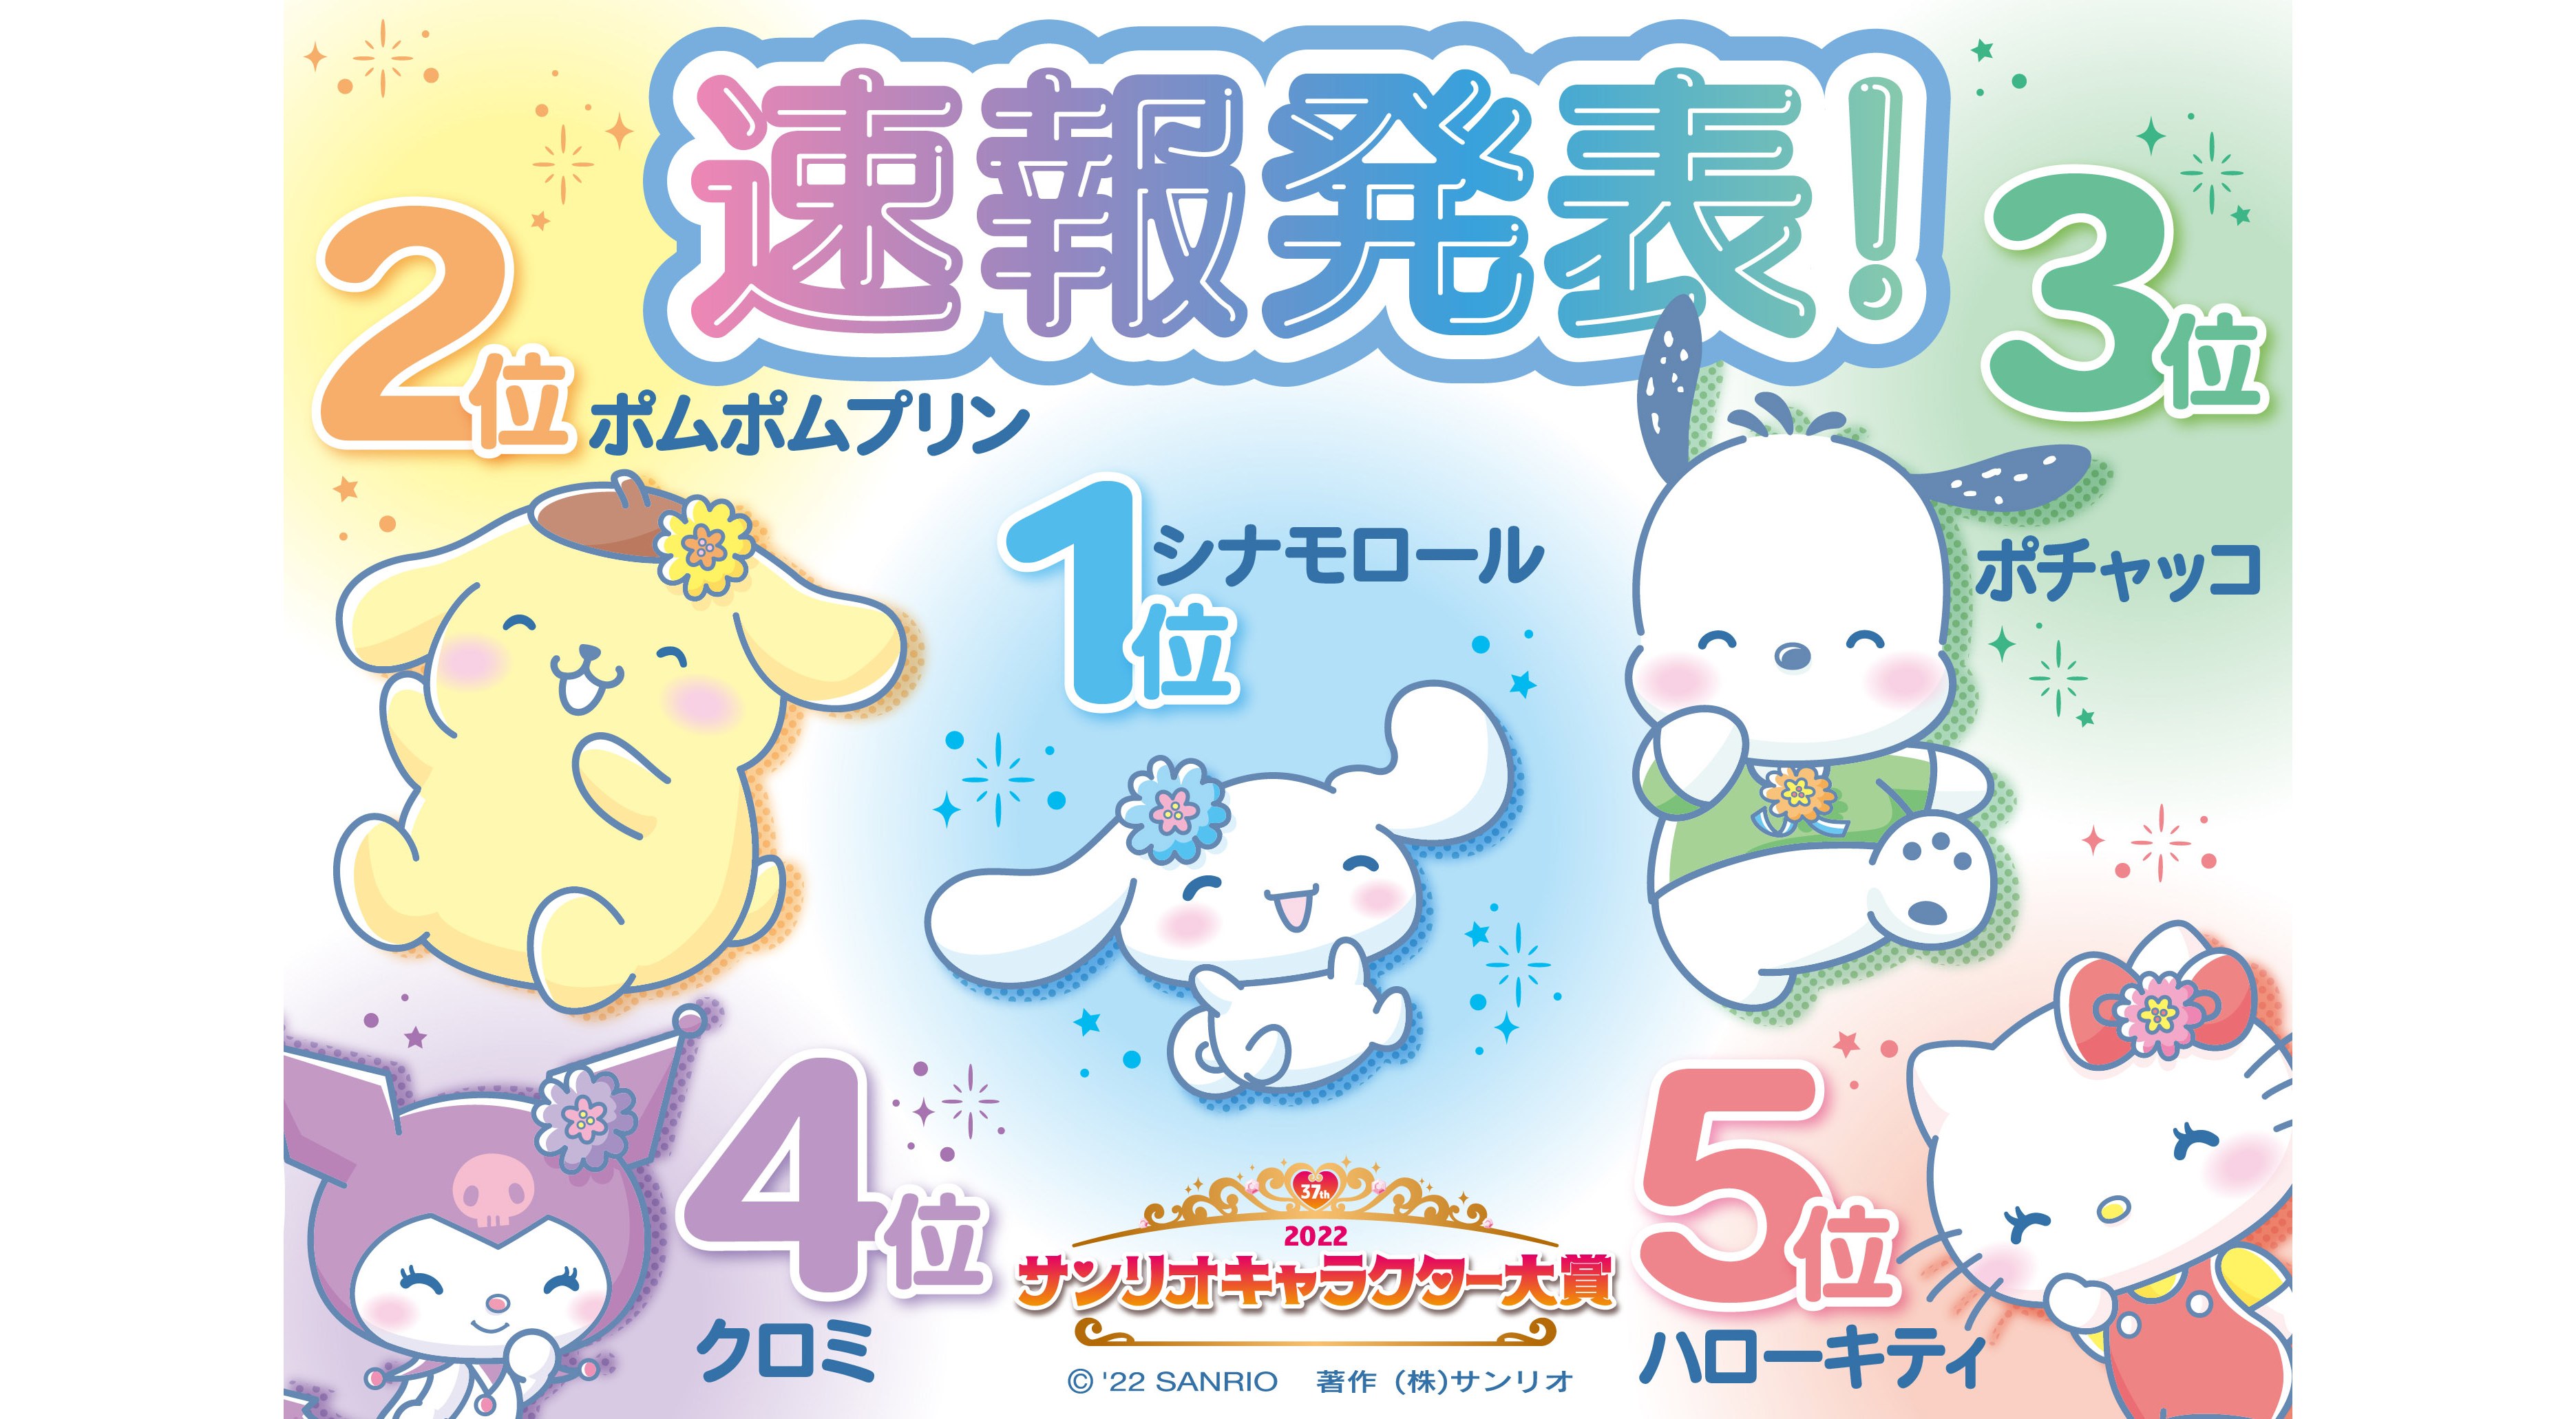 Sanrio's Cinnamoroll Collaborates With AEON On Merchandise and